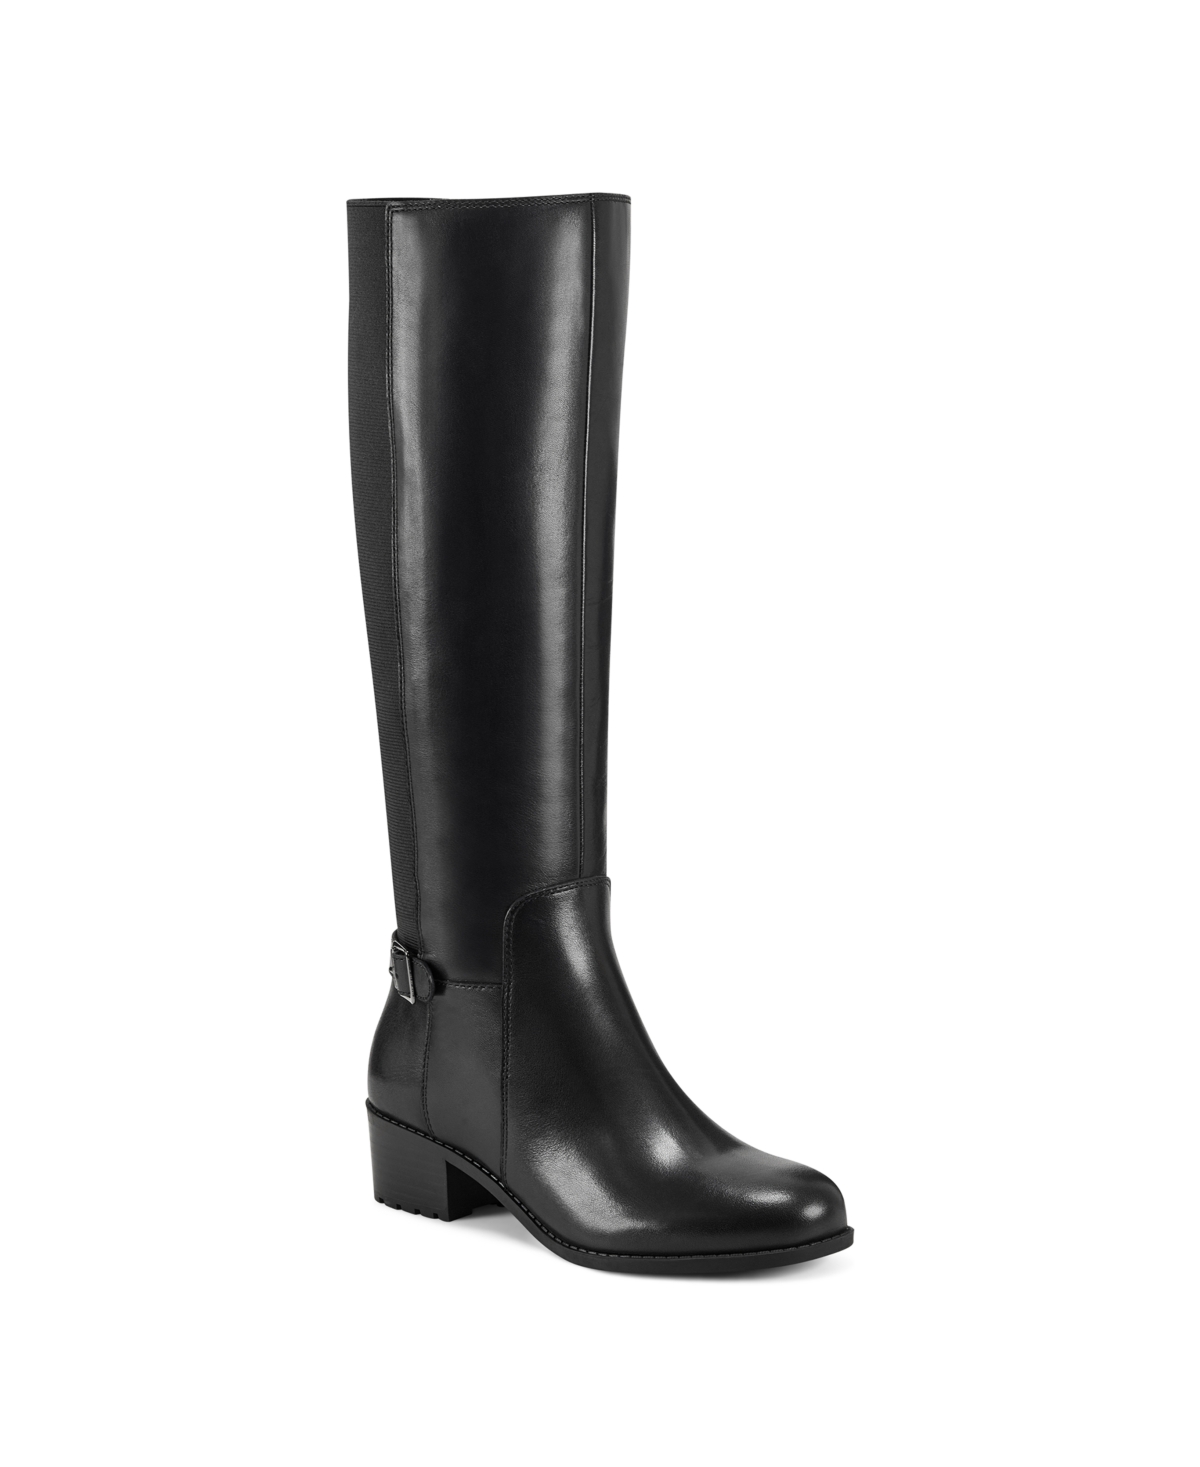 UPC 195608202274 product image for Easy Spirit Women's Chaza Tall Regular Calf Boots Women's Shoes | upcitemdb.com